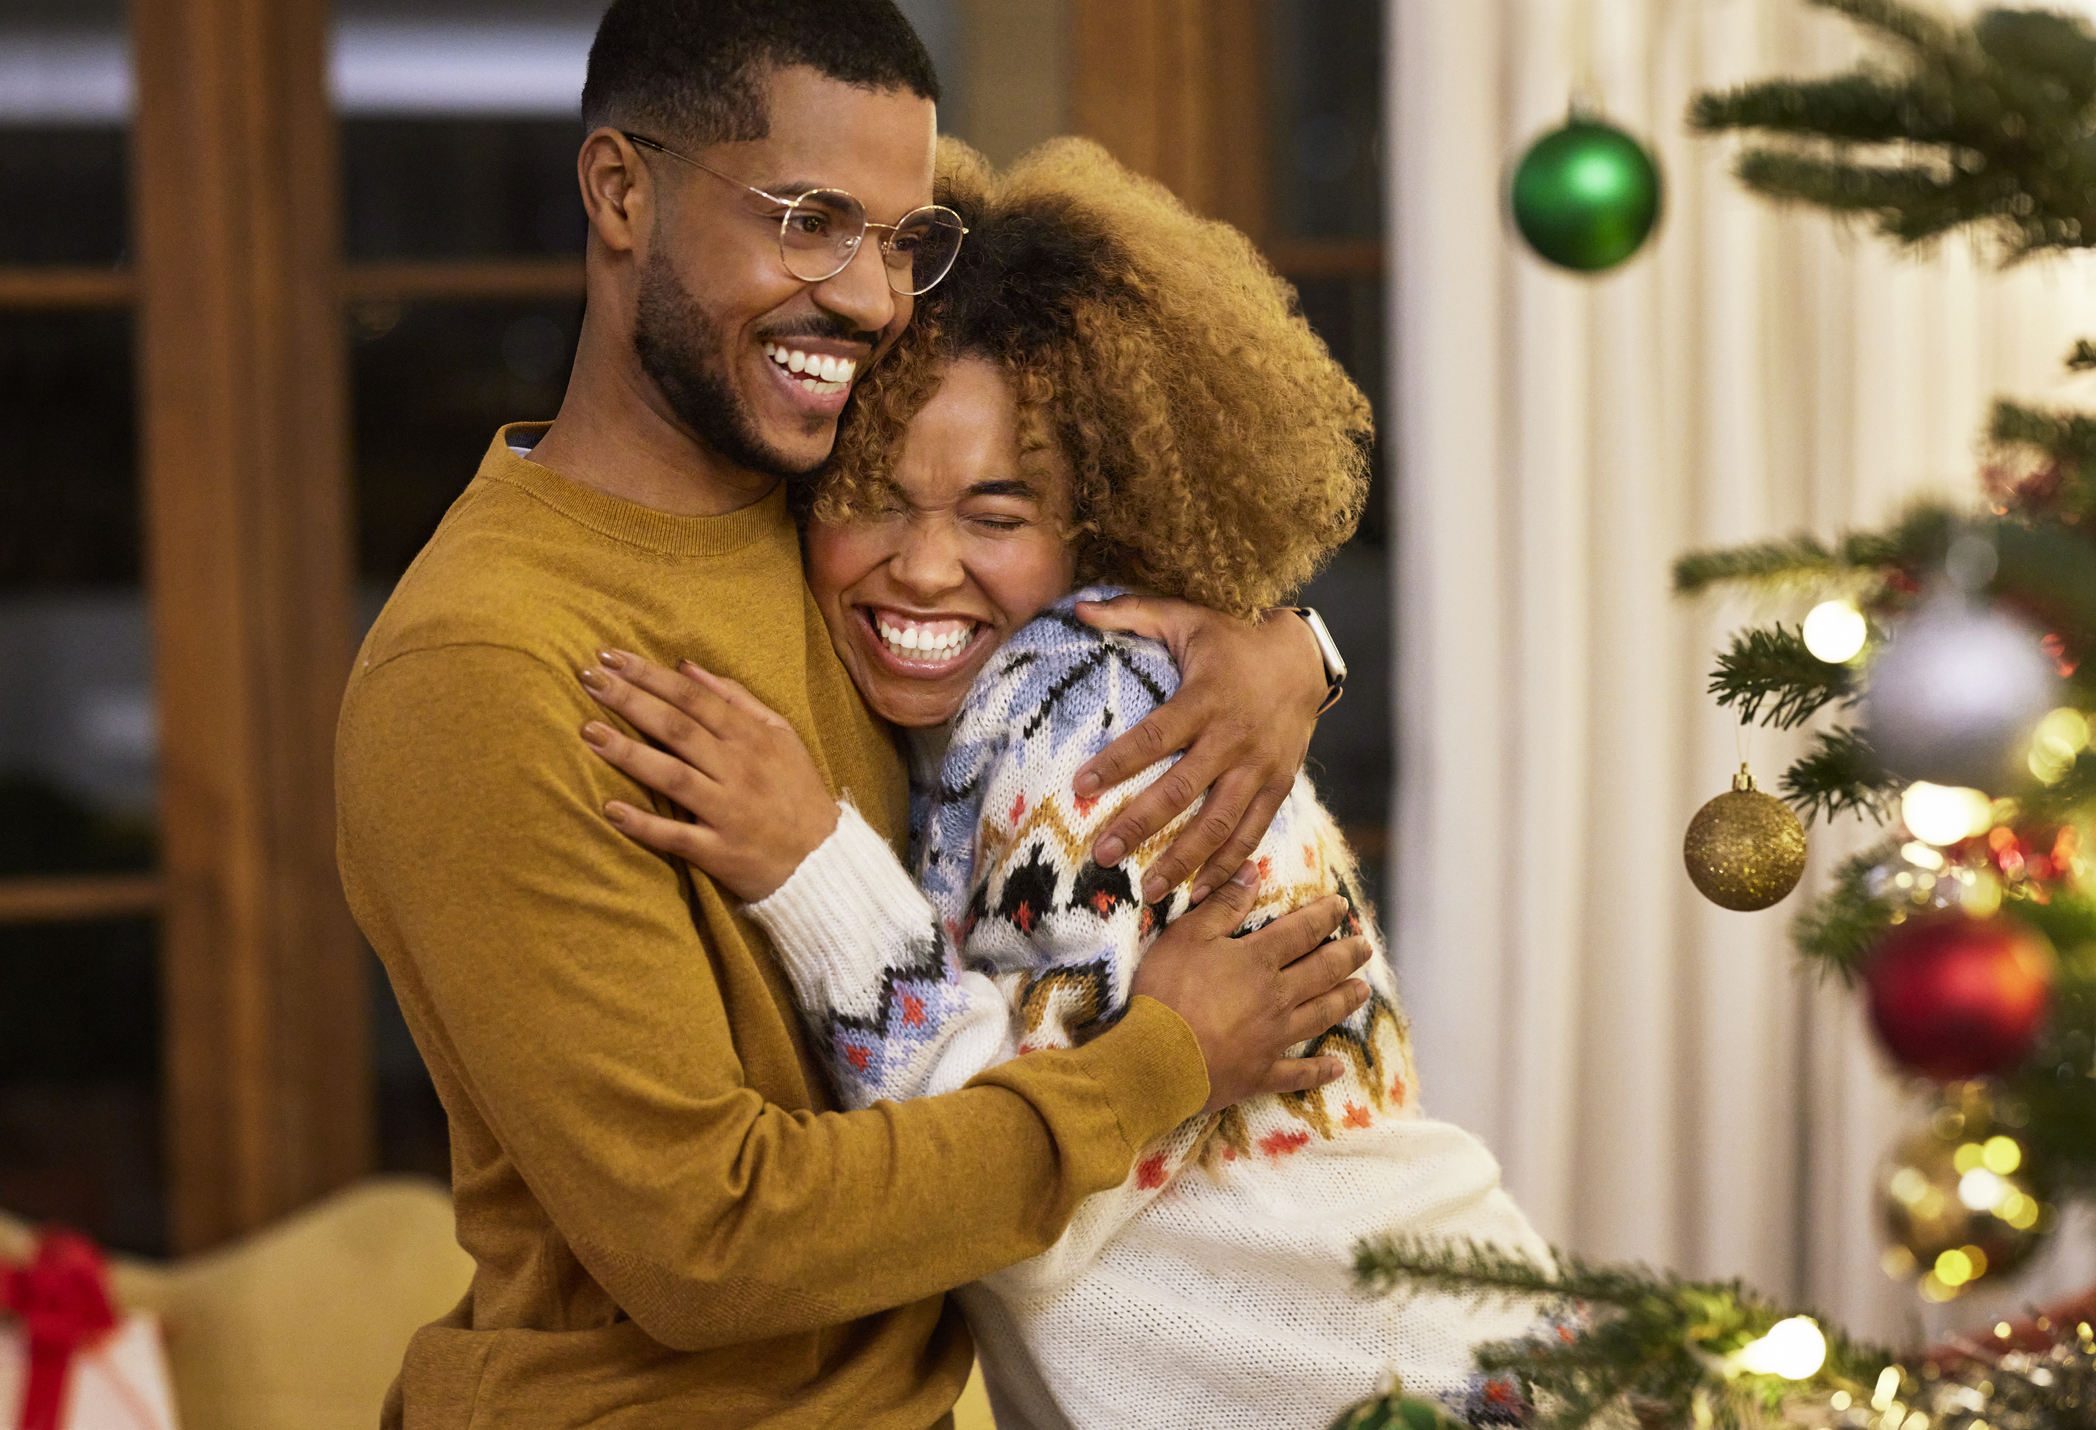 How to Connect With Your Partner’s Family This Holiday Season When You’re Newly Dating